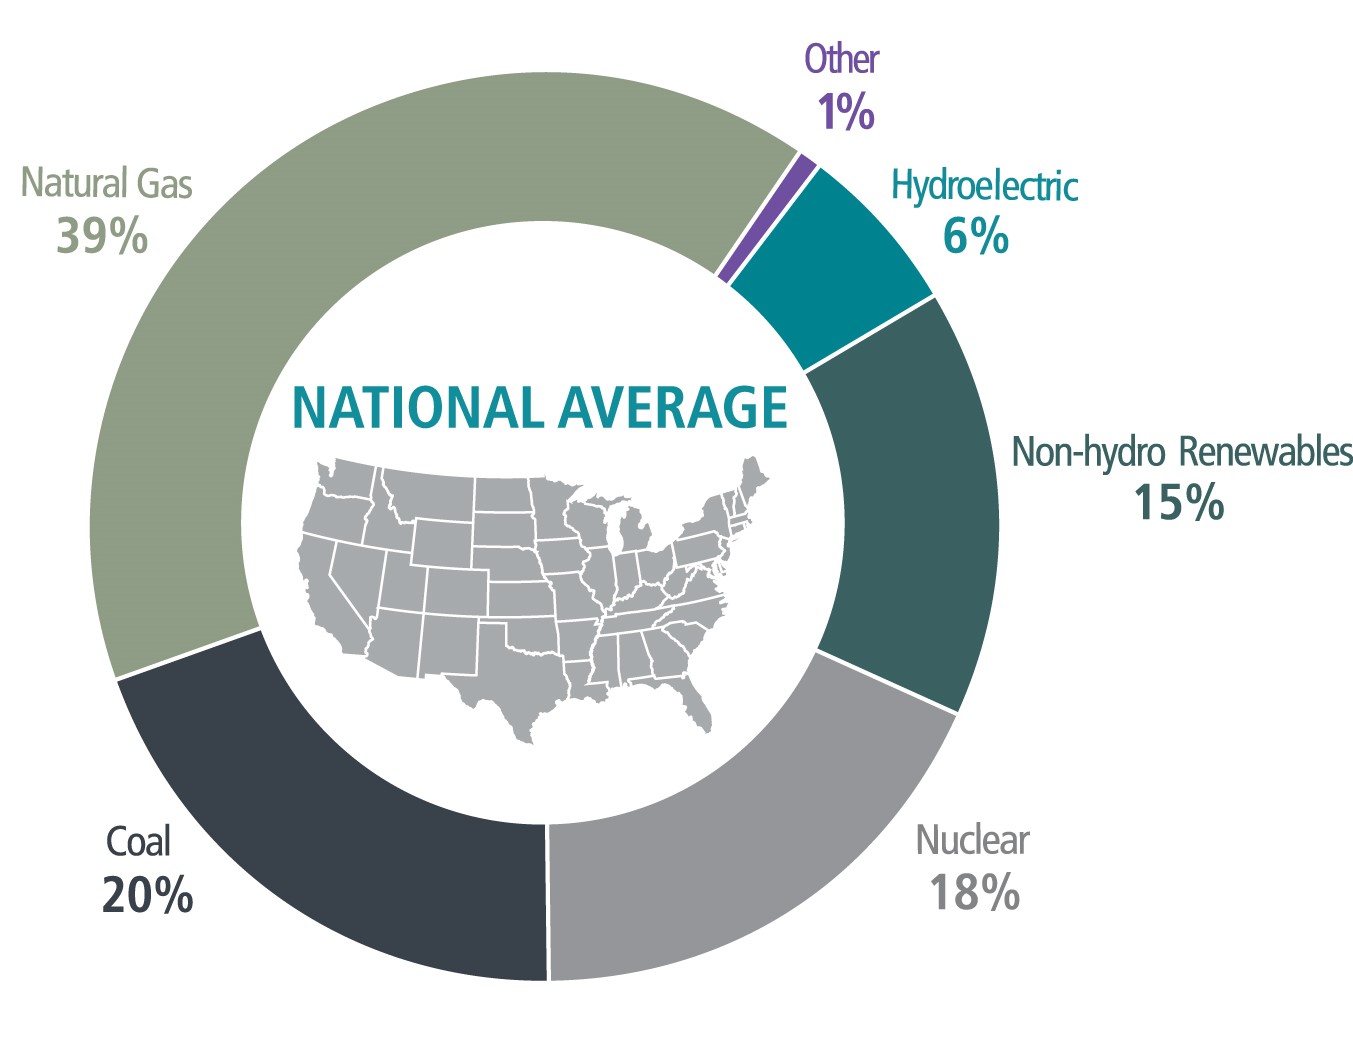 donut chart showing 2022 national average energy mix: 38% natural gas, 22% coal, 19% nuclear, 13% nonhydro renewables, 6% hydro, and 2% other